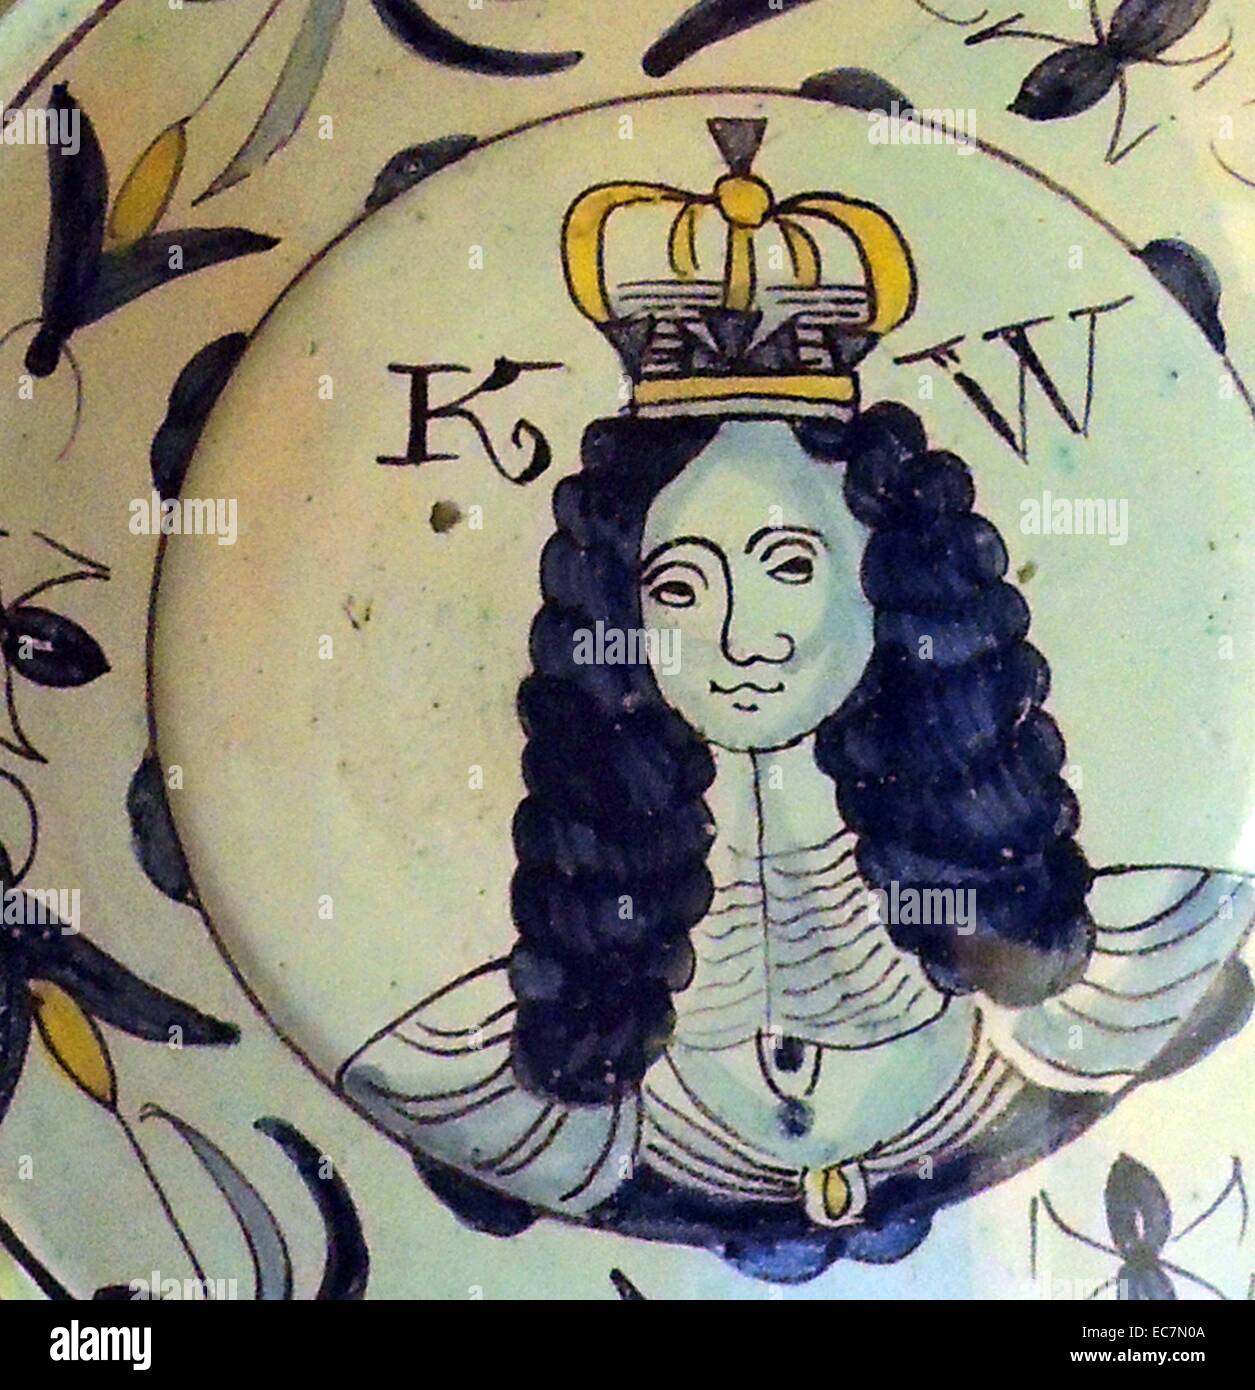 Charger, Brislington, c 1690 depicts William III who ruled jointly with his wife, Mary II.  A similar charger portraying Queen Mary features the same flying insect in the border but the flowering plants are replaced by thistles, perhaps in recognition of Mary Stuart's ancestry. Stock Photo